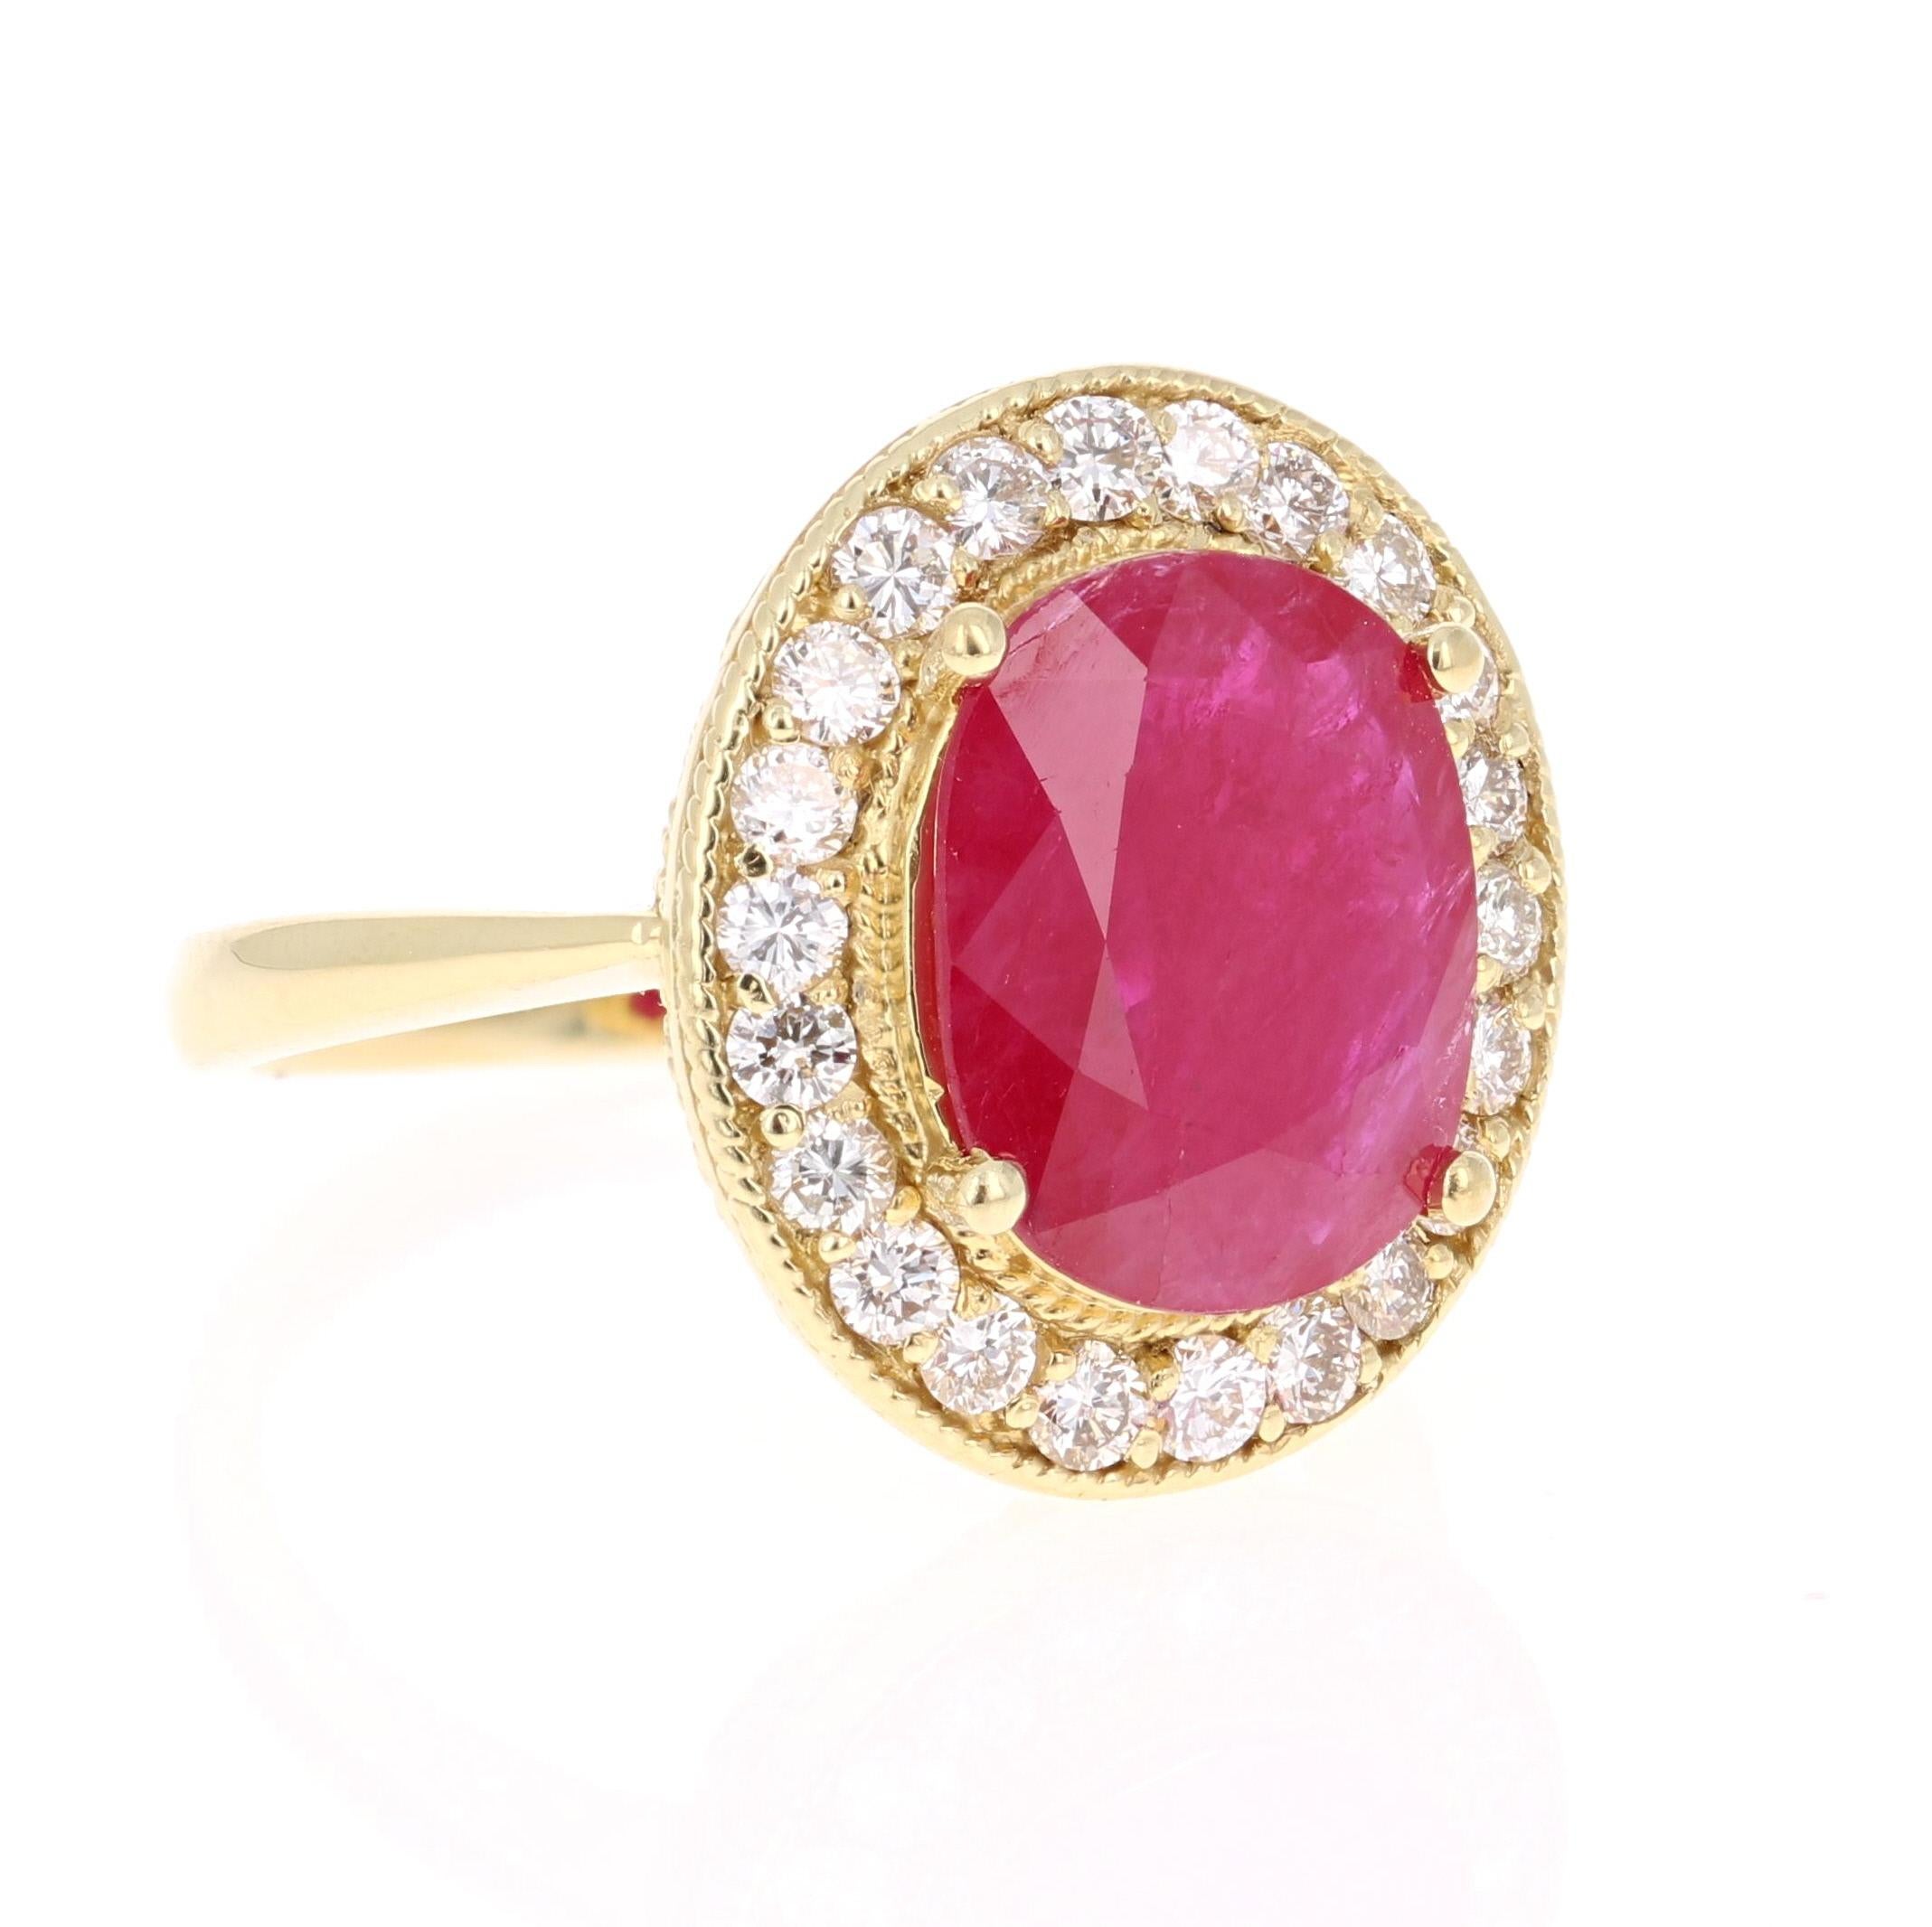 This gorgeous and elegant Ruby & Diamond Ring can be a gorgeous Engagement Ring or a Cocktail Ring. It has a Oval Cut Deep Red Ruby that is 4.24 Carats with a halo of 22 Round Cut Diamonds weighing 0.77 carats. The total carat weight of the ring is